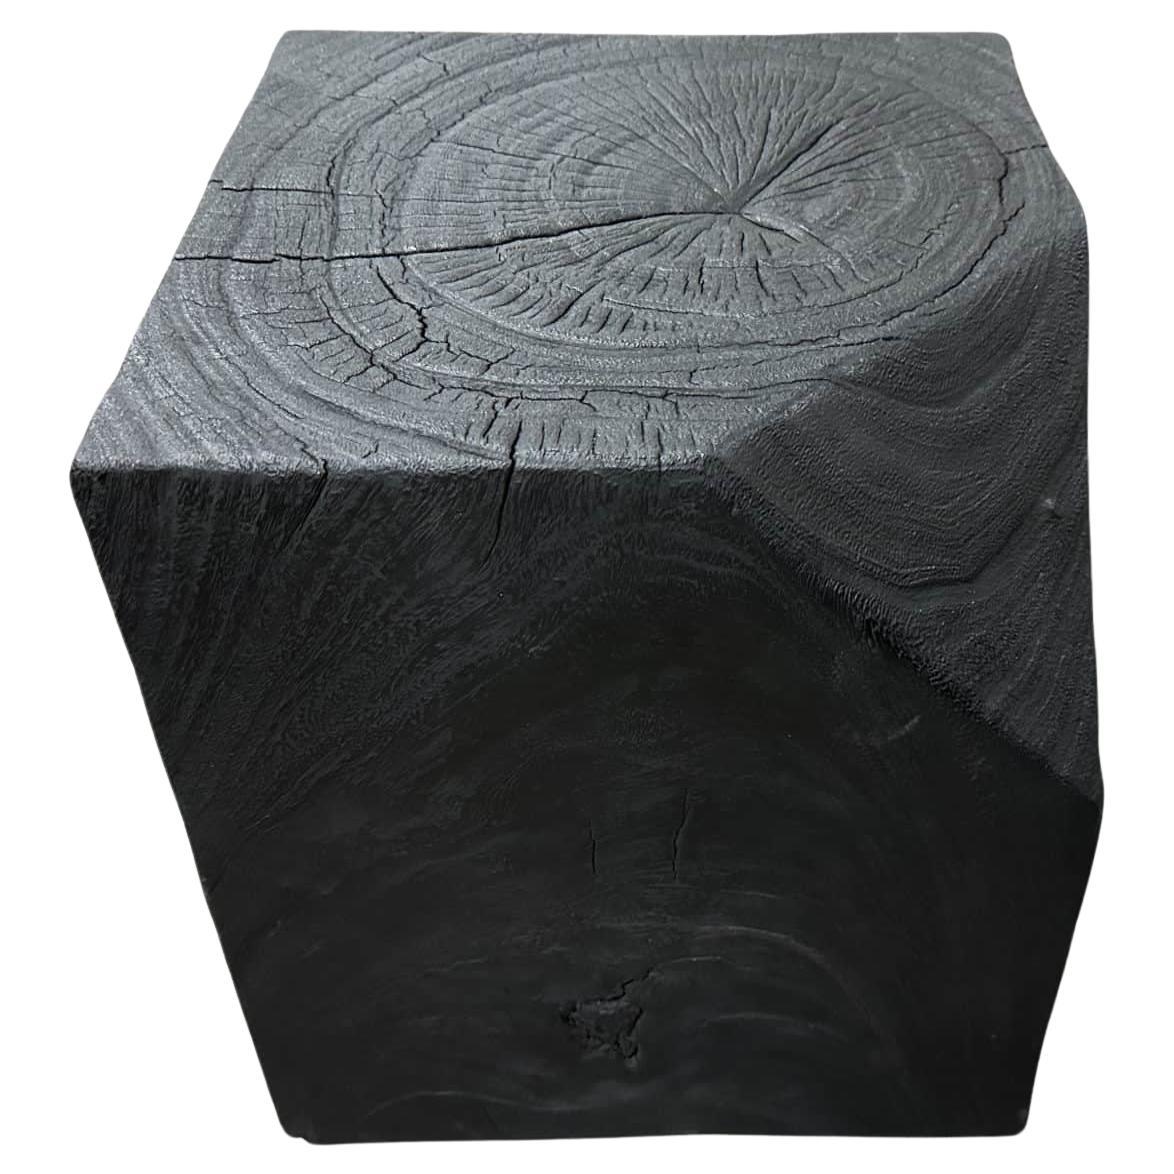 Andrianna Shamaris Modular Charred Side Table  In Excellent Condition For Sale In New York, NY